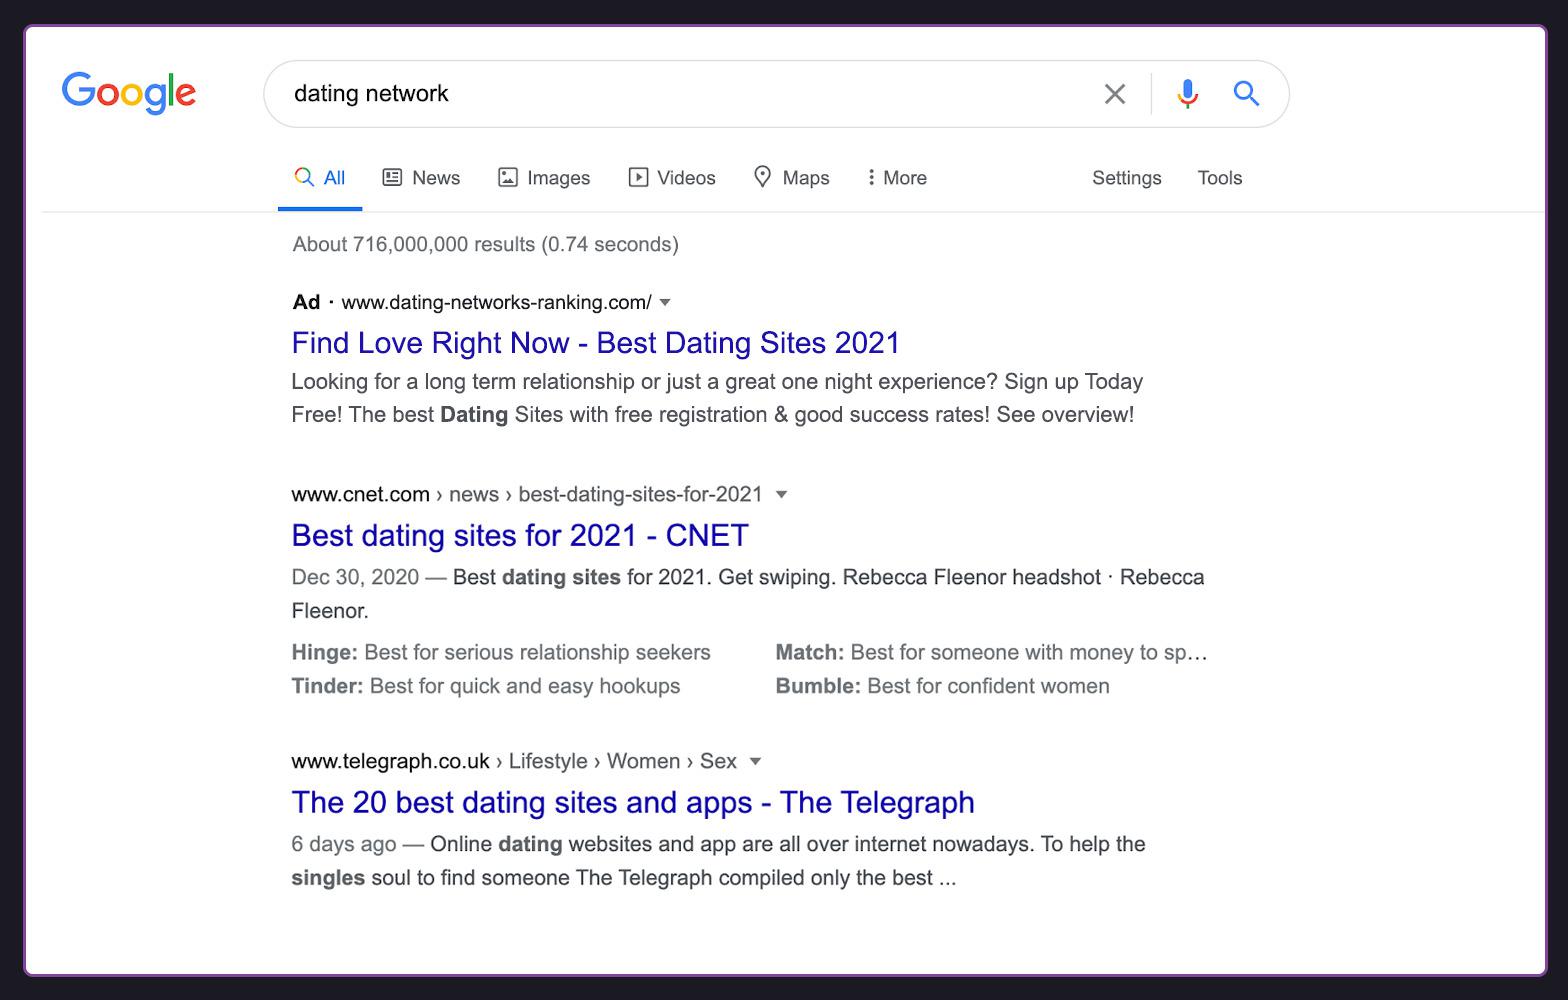 Case Study: How to Make $443.85 Promoting Dating Offers on Google Ads